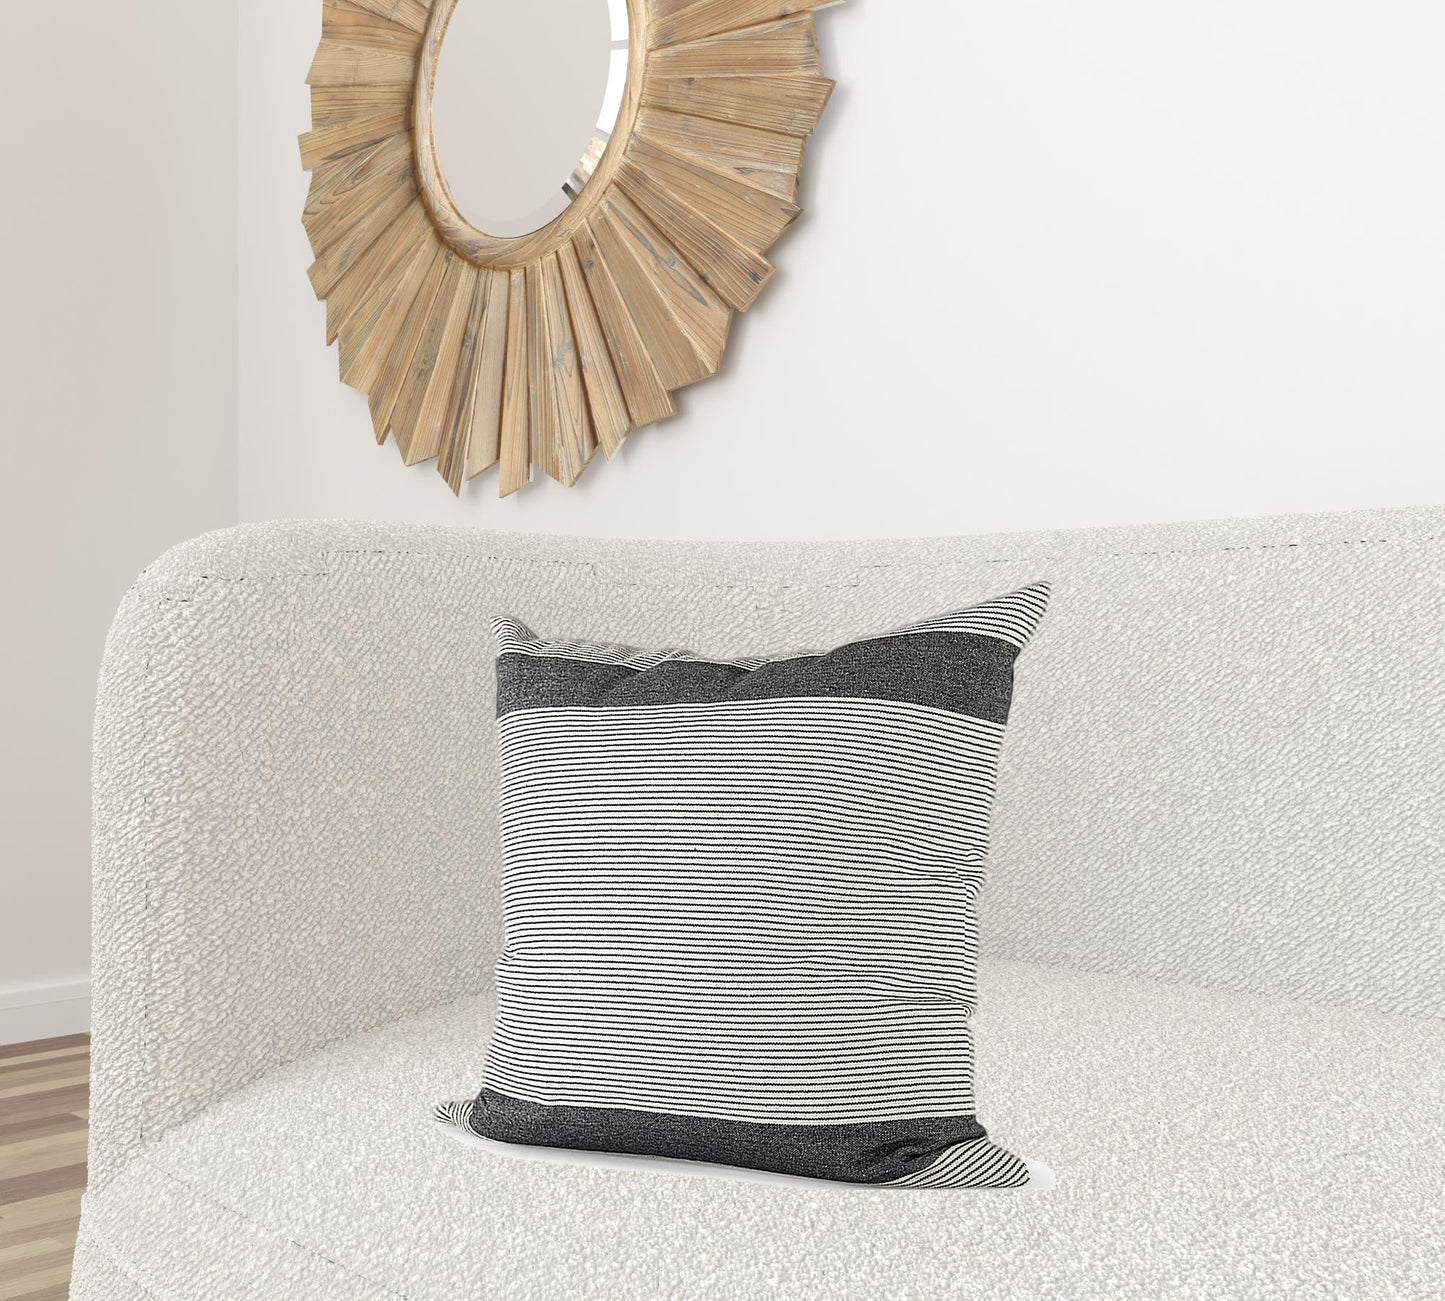 Beige And Gray Striped Throw Pillow Cover